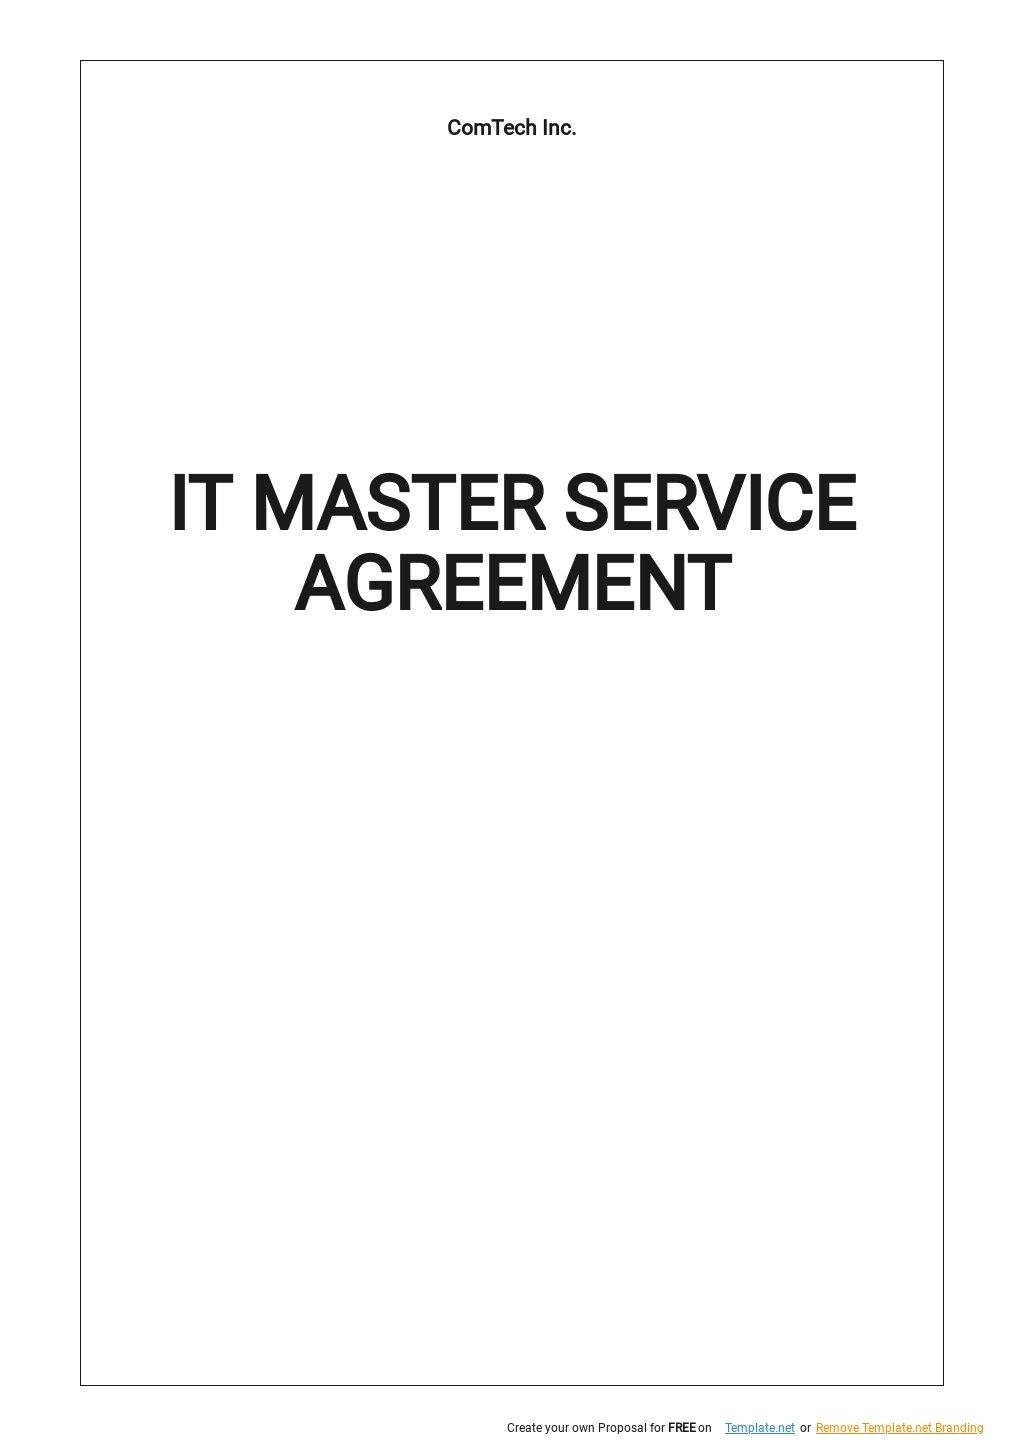 Master Service Agreement Templates 9+ Docs, Free Downloads